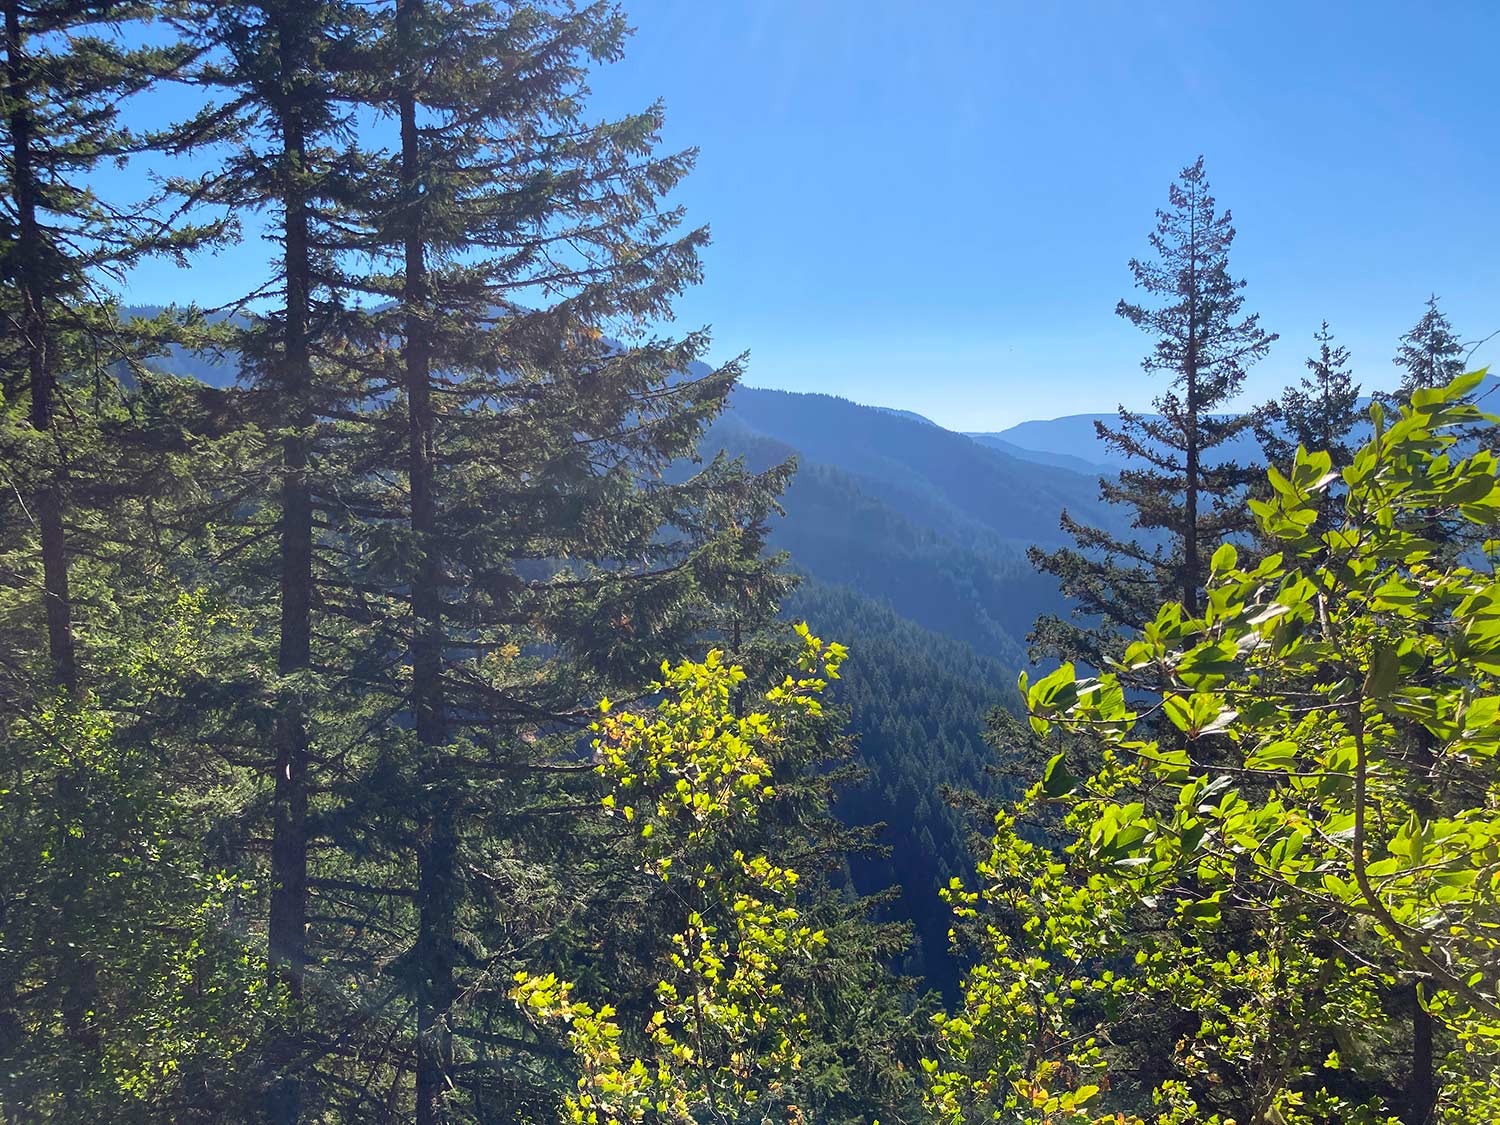 An overlook at the top of the route, with bright green shrubs in the foreground, dark green conifers in the distance, and blue, tree-covered hills on the horizon